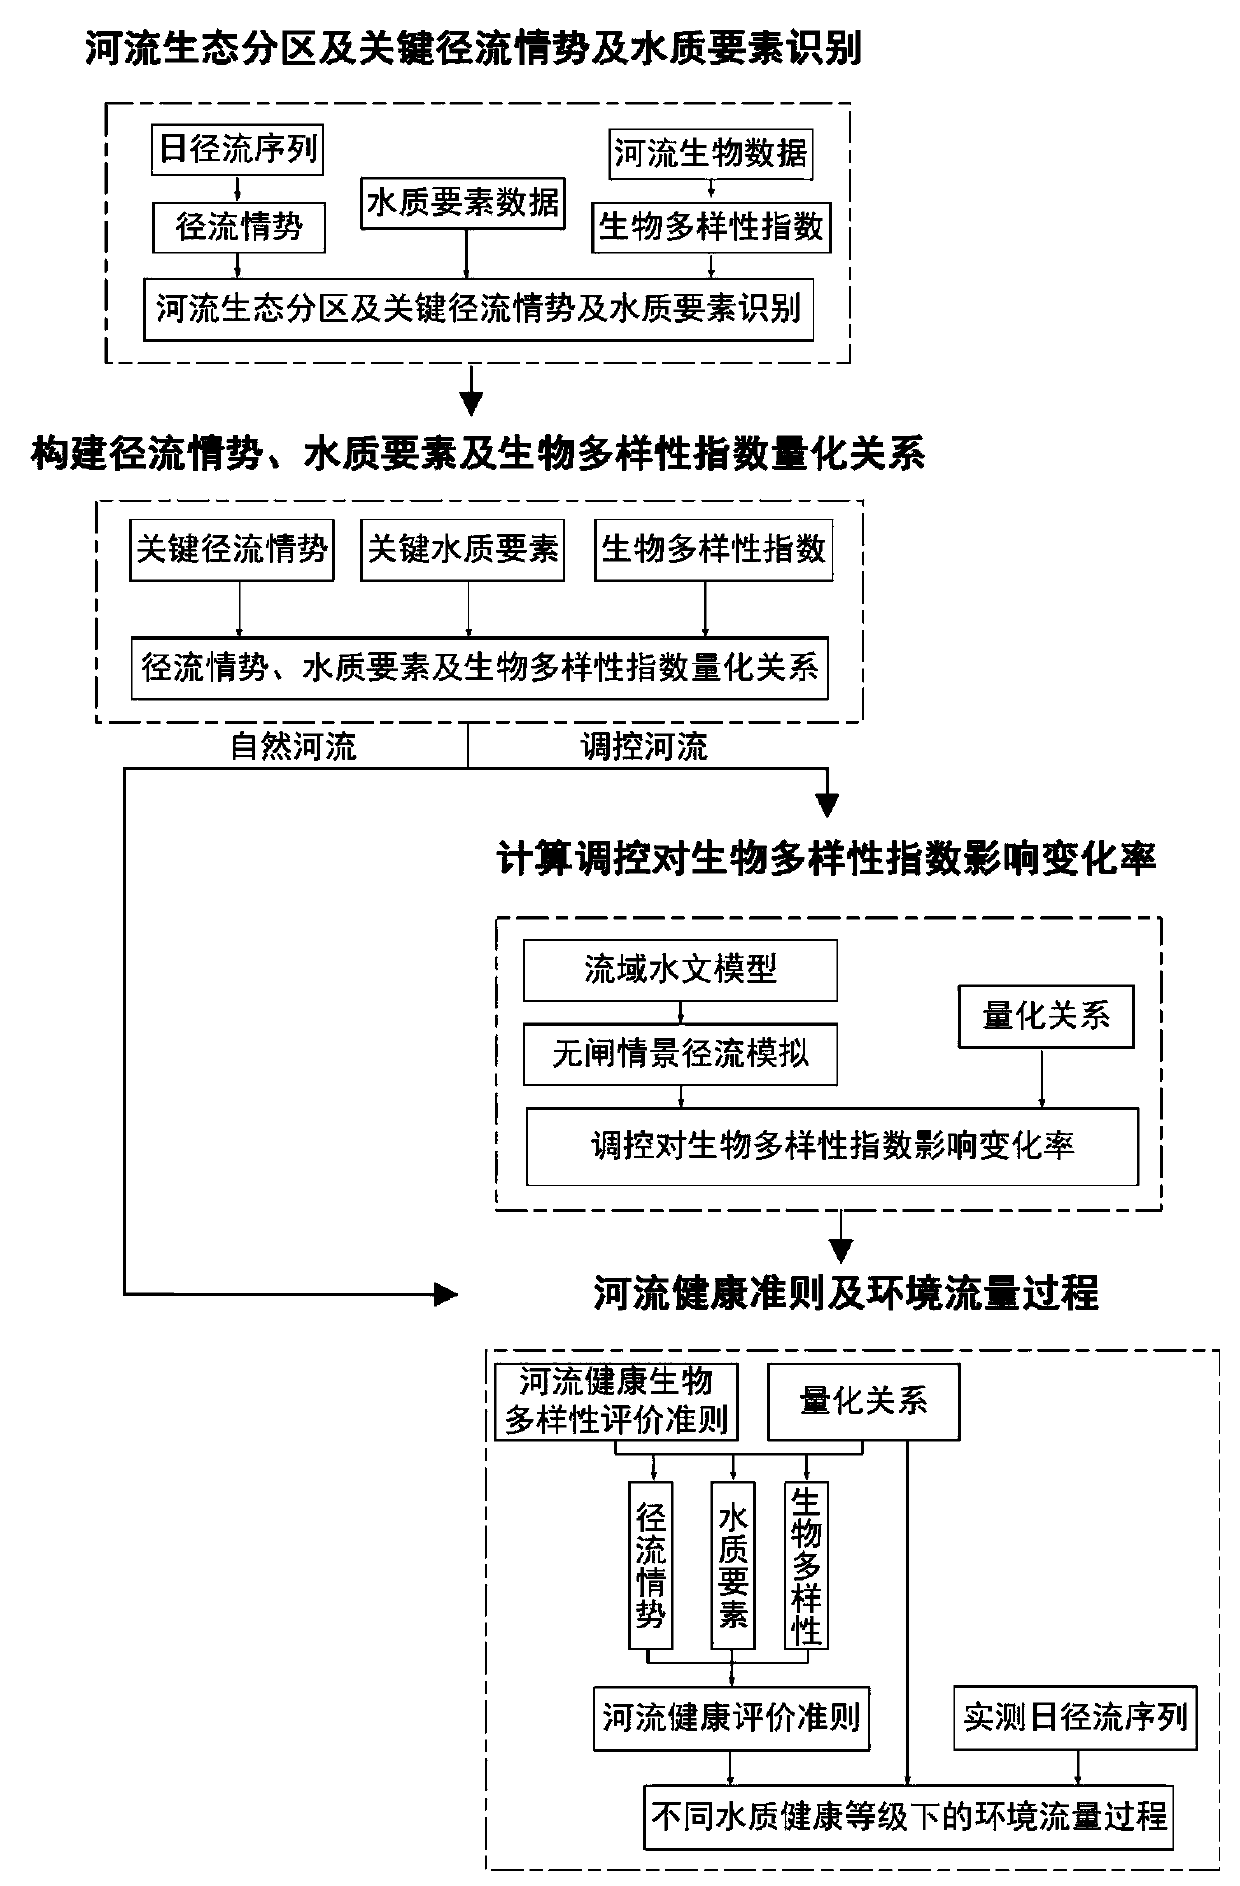 Environmental flow process regulation and control method based on runoff situation, water quality and biological multiple elements